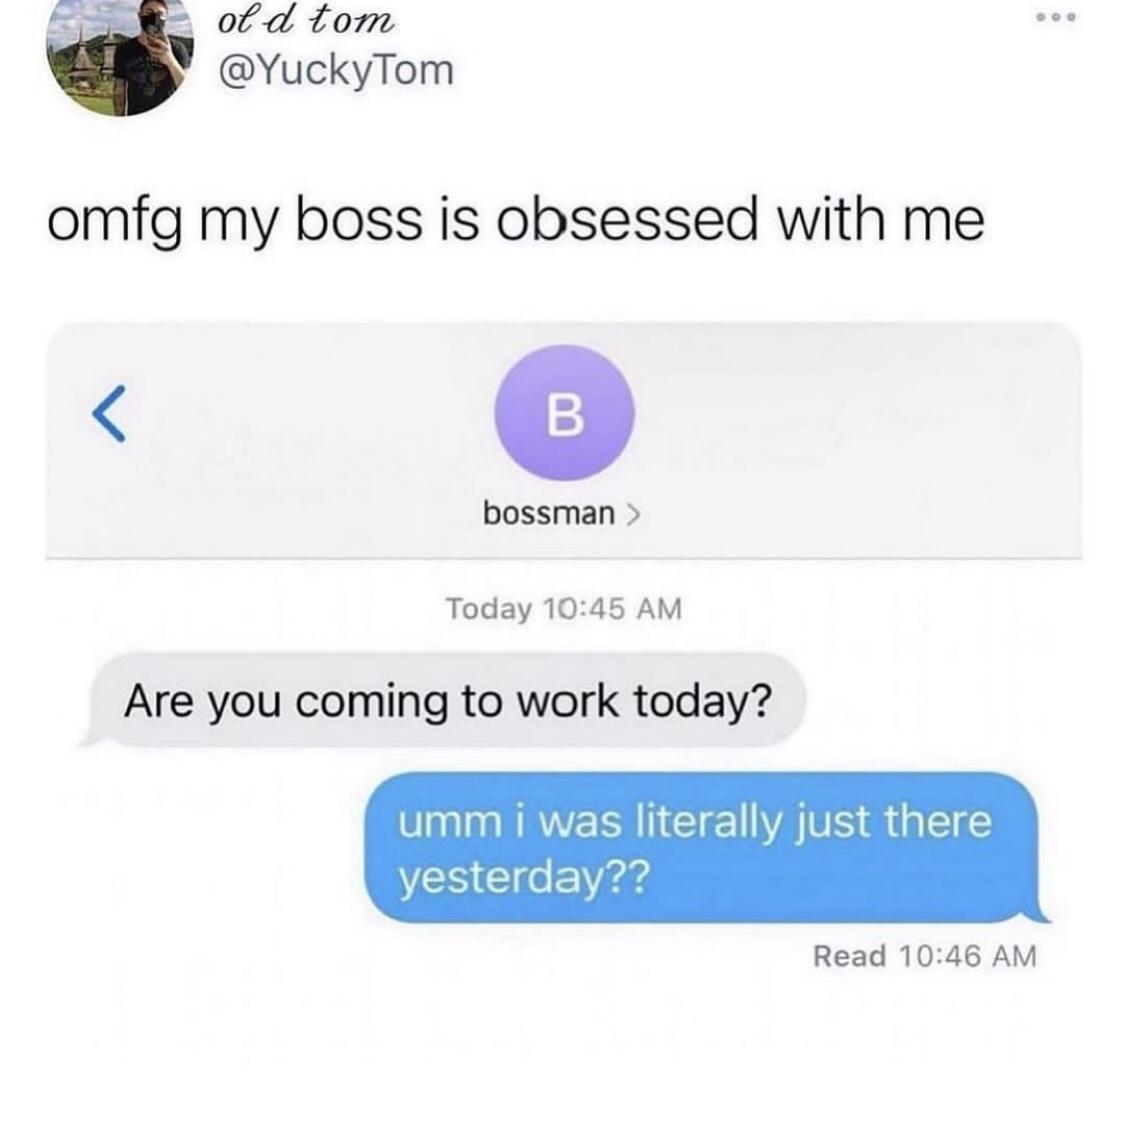 cool pics and memes - my boss is obsessed with me meme - old tom omfg my boss is obsessed with me B bossman > Today Are you coming to work today? umm i was literally just there yesterday?? 000 Read